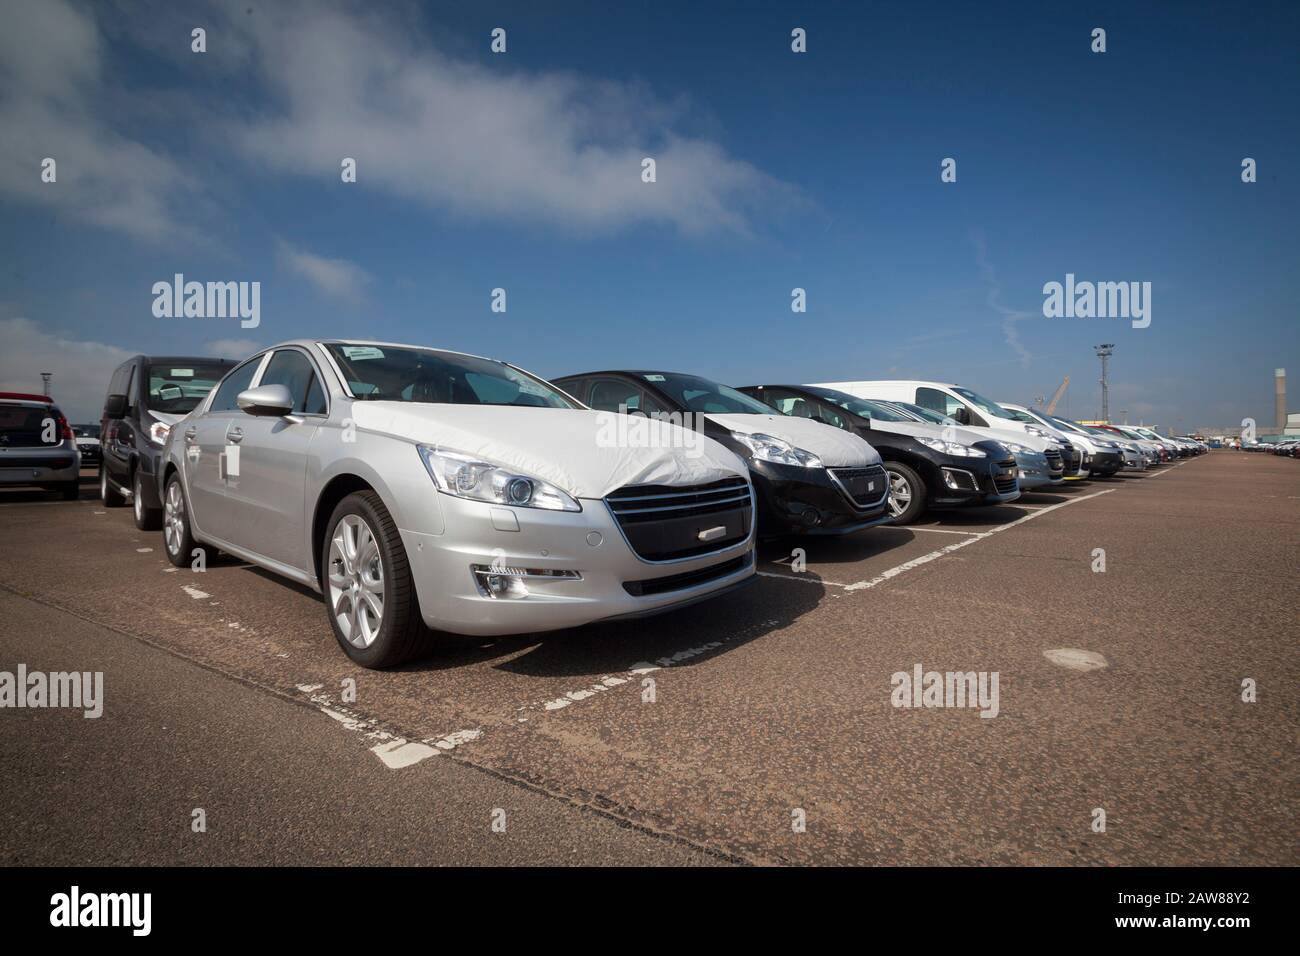 Brand new cars imported and exported from port Stock Photo